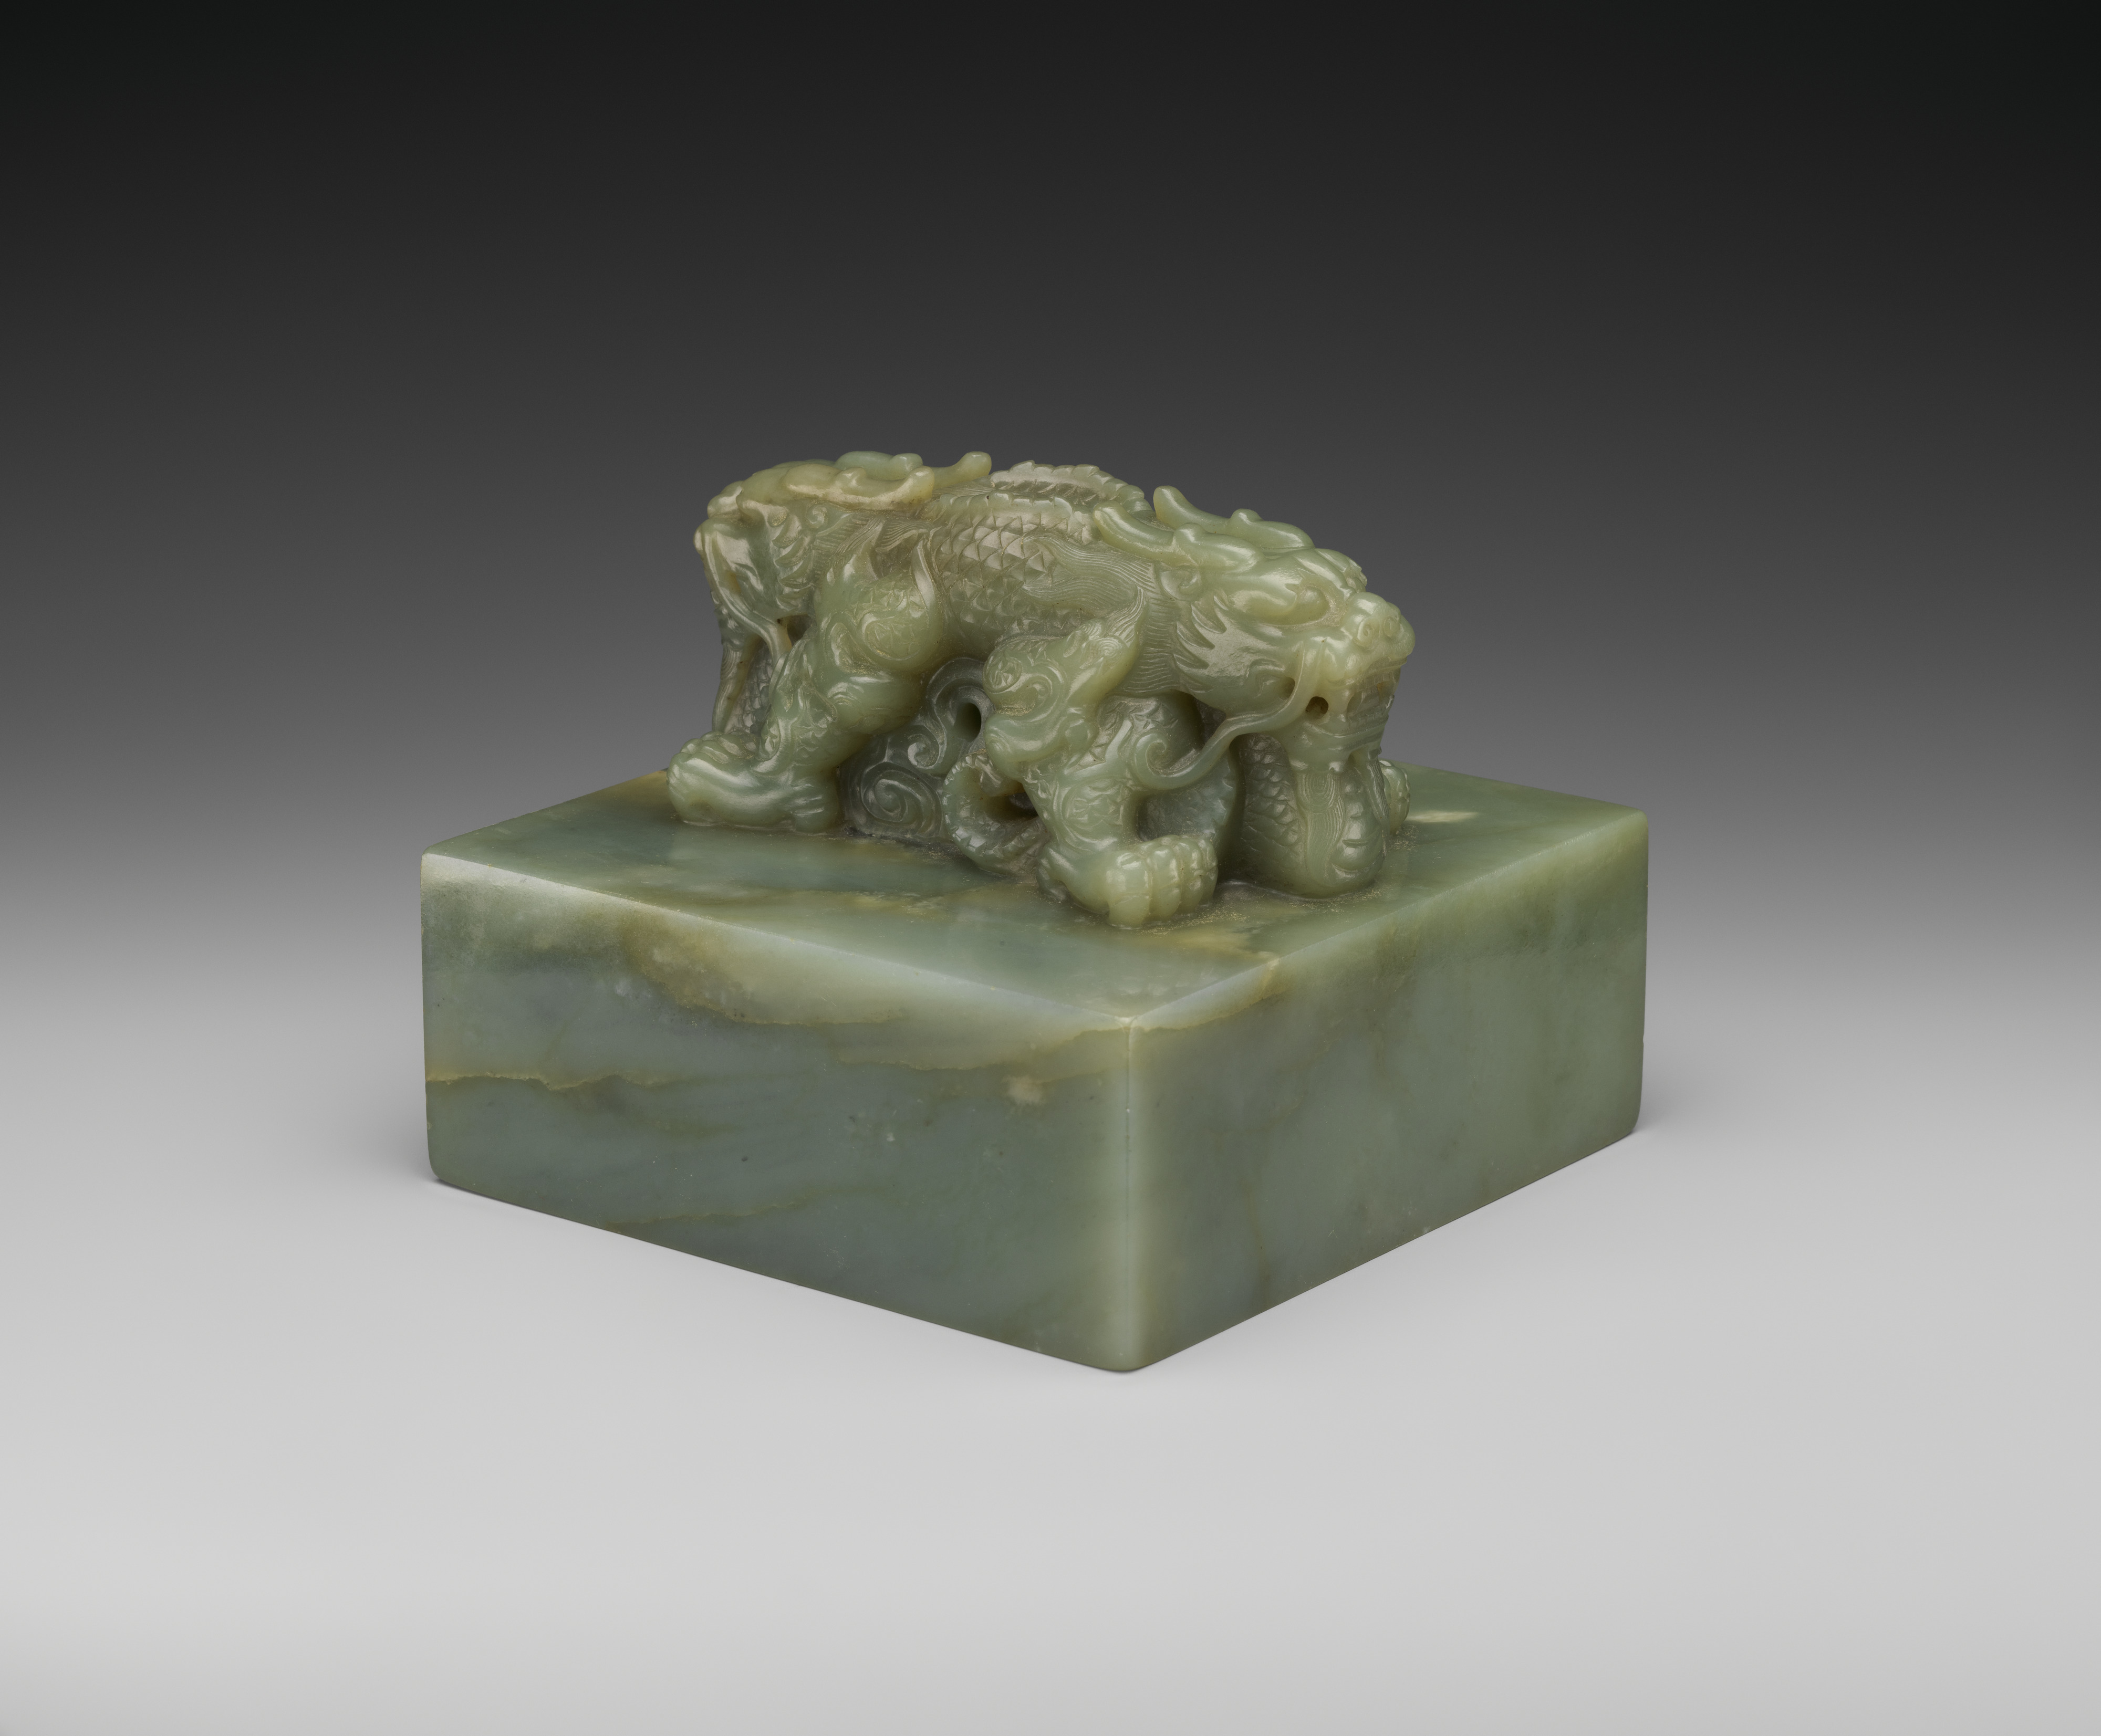 Seal with two dragons, Jade (nephrite), China